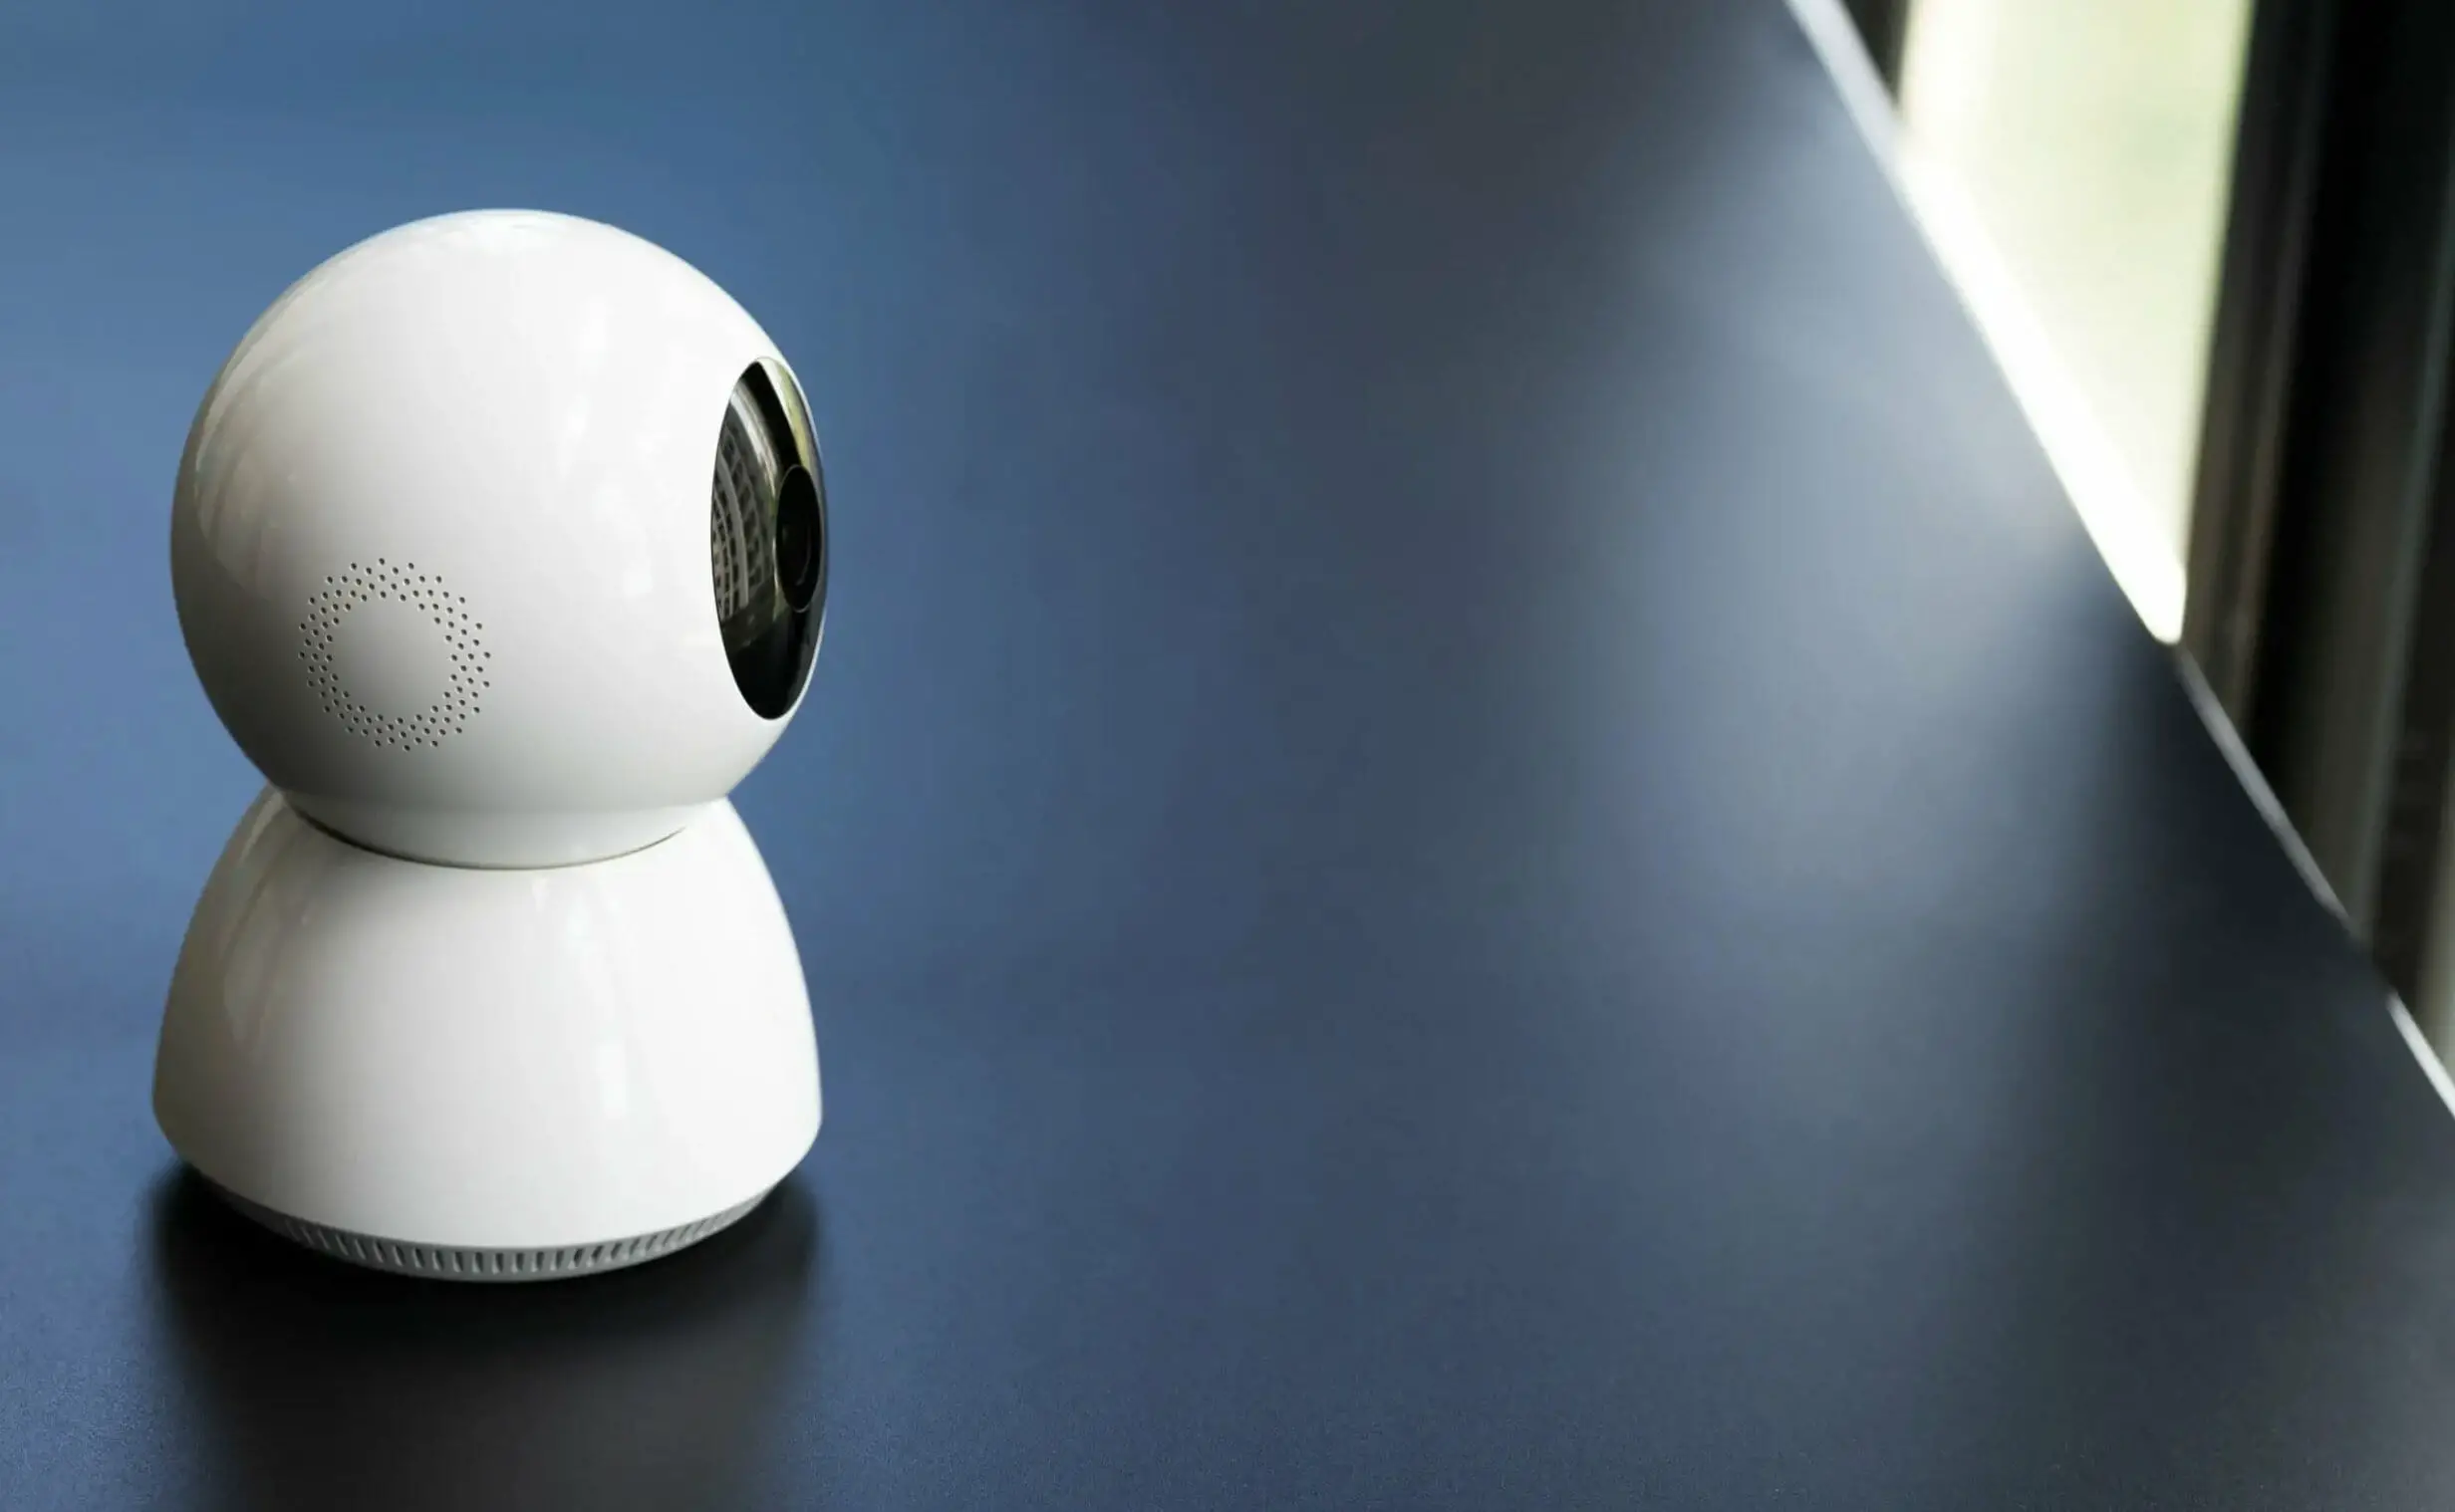 dome security camera at home